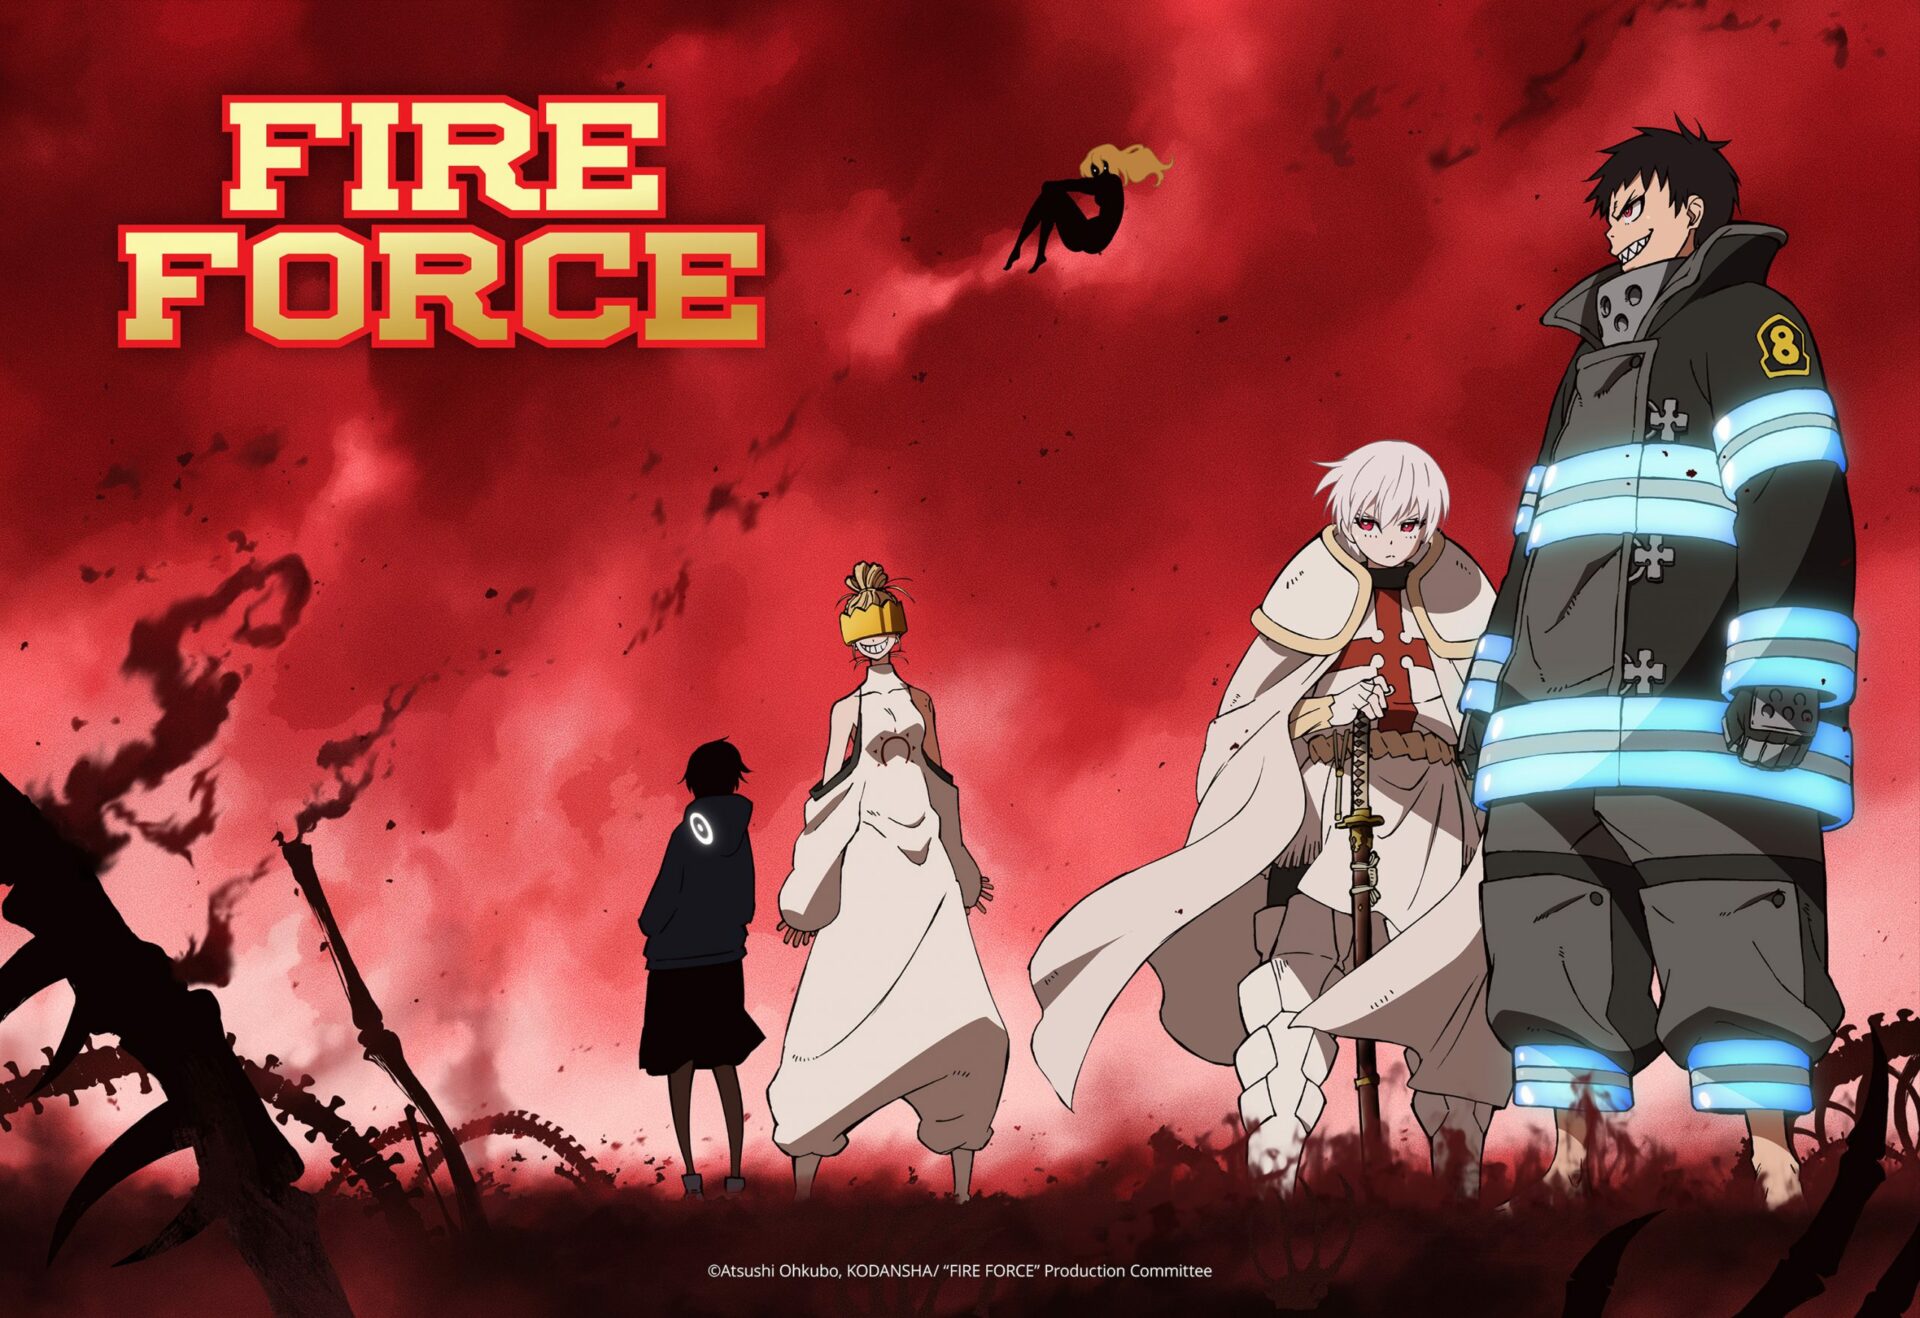 Fire Force Manga Entered Its ‘Climax,’ Will be Ending Soon